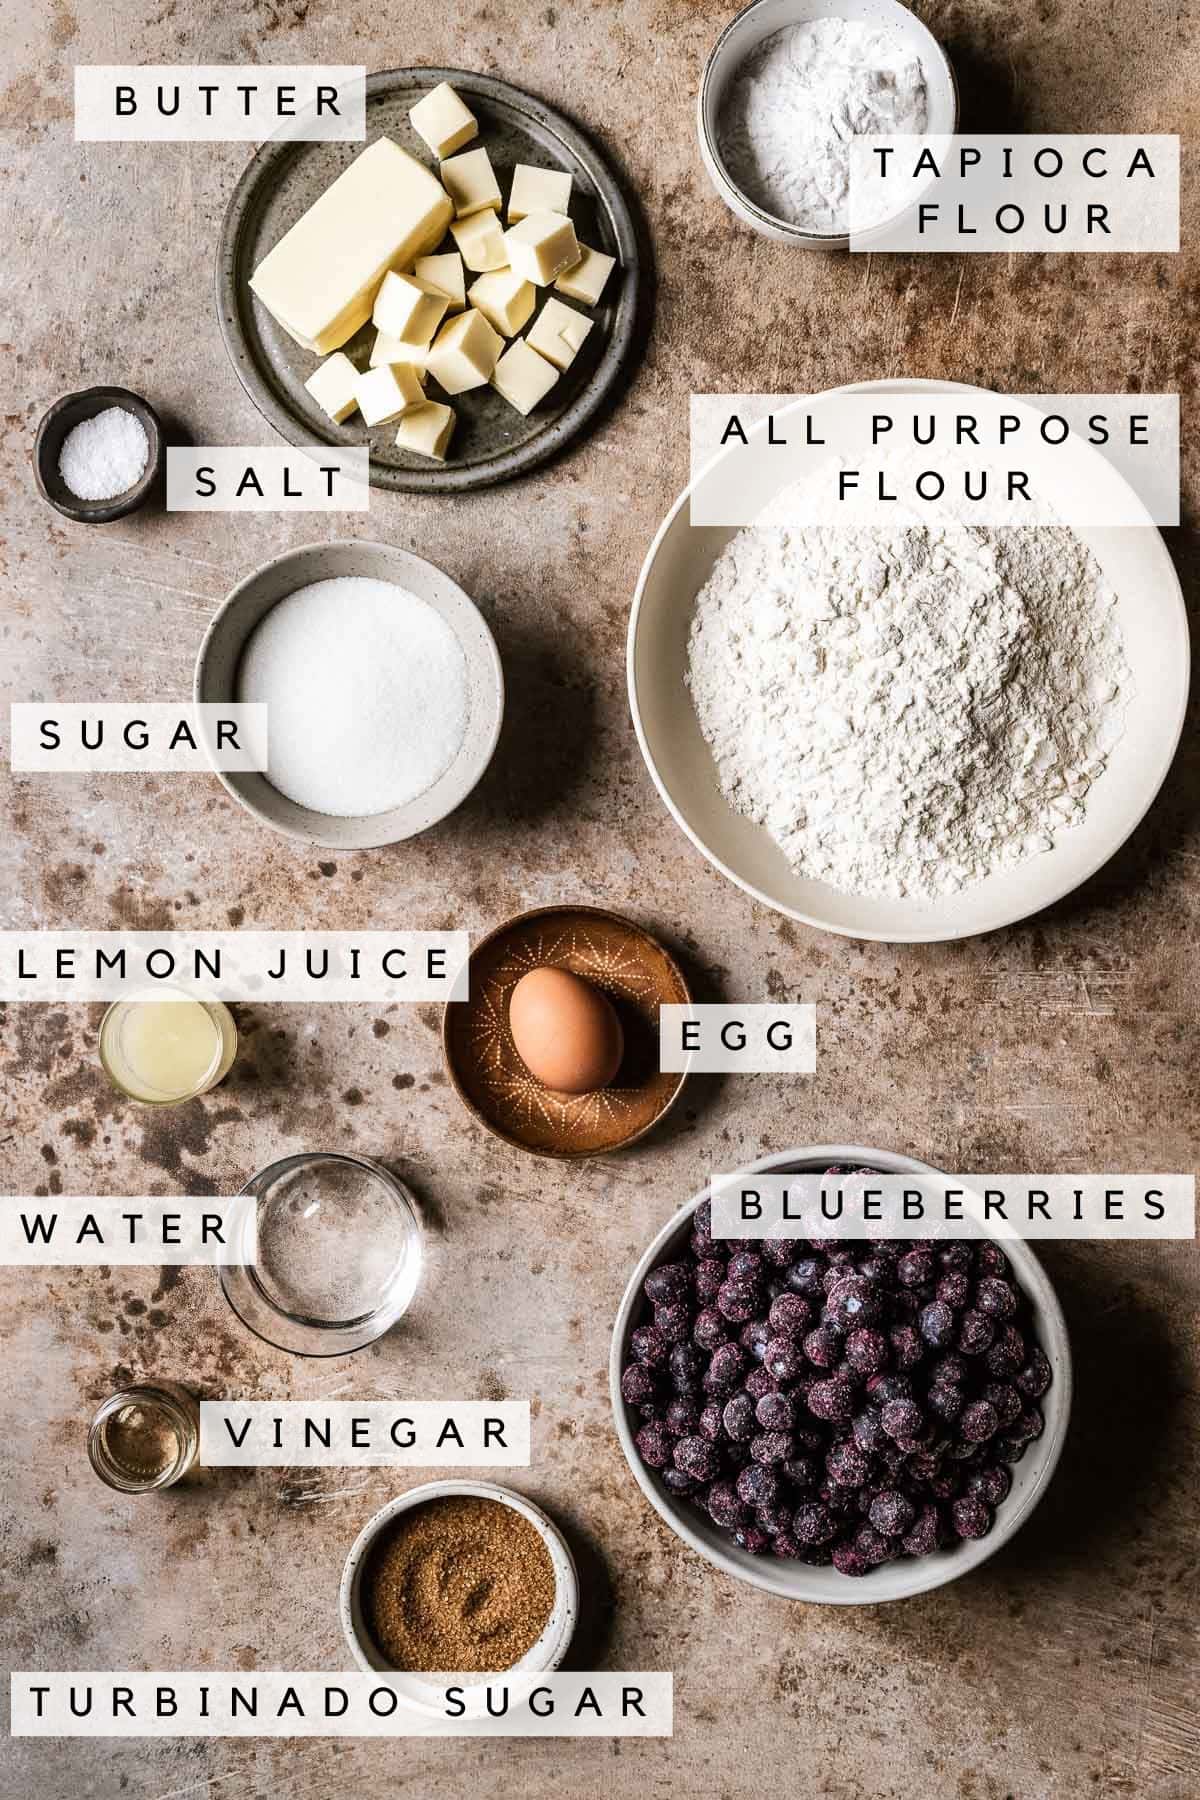 Labeled ingredients in bowls for blueberry pie recipe with frozen blueberries.